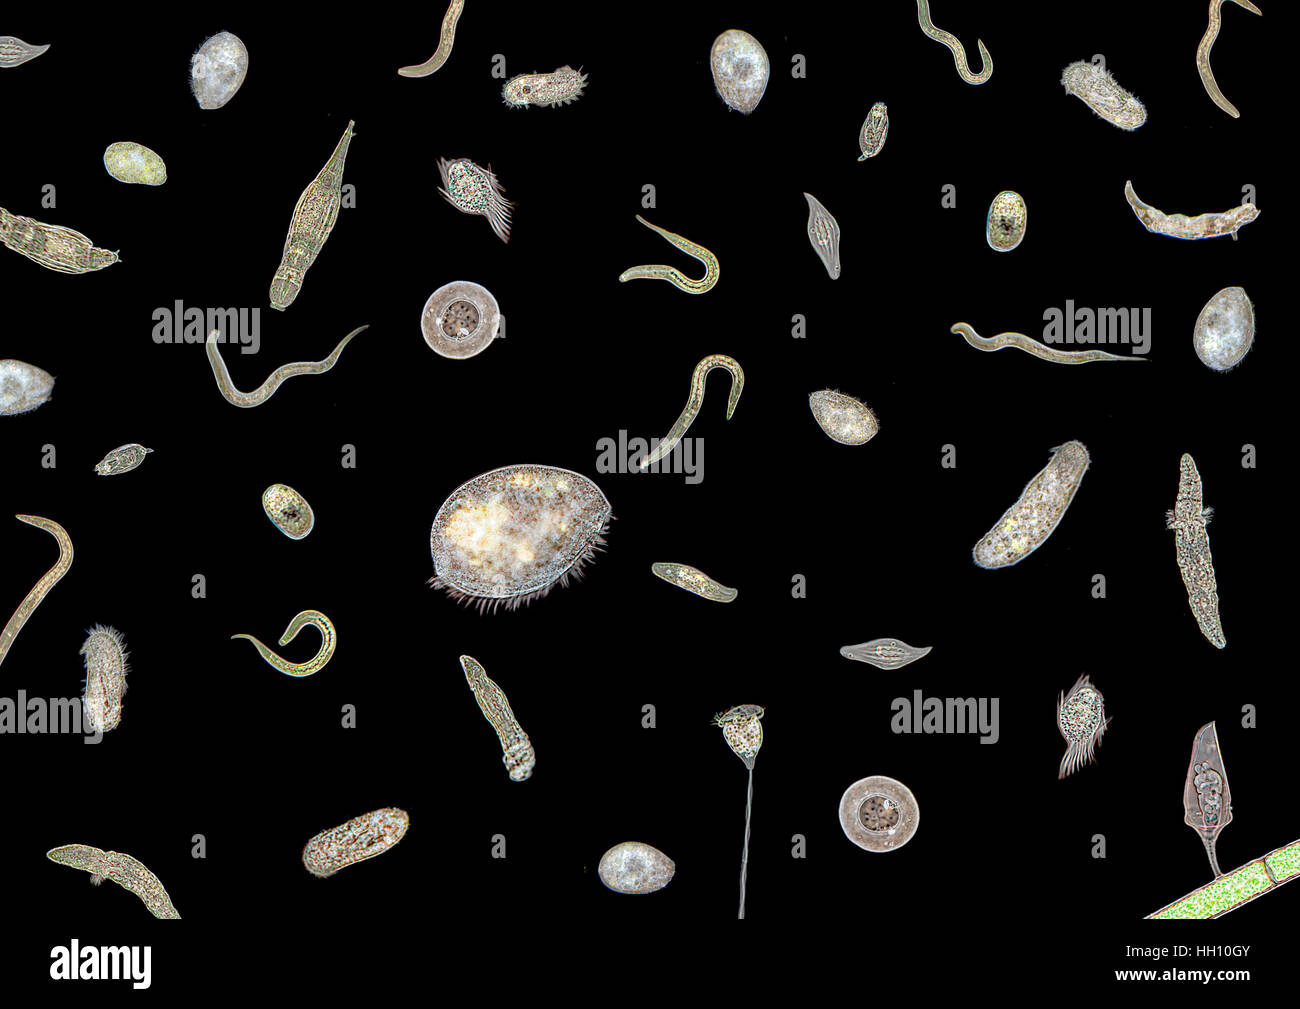 micrography showing lots of various translucent freshwater microorganisms in dark back Stock Photo